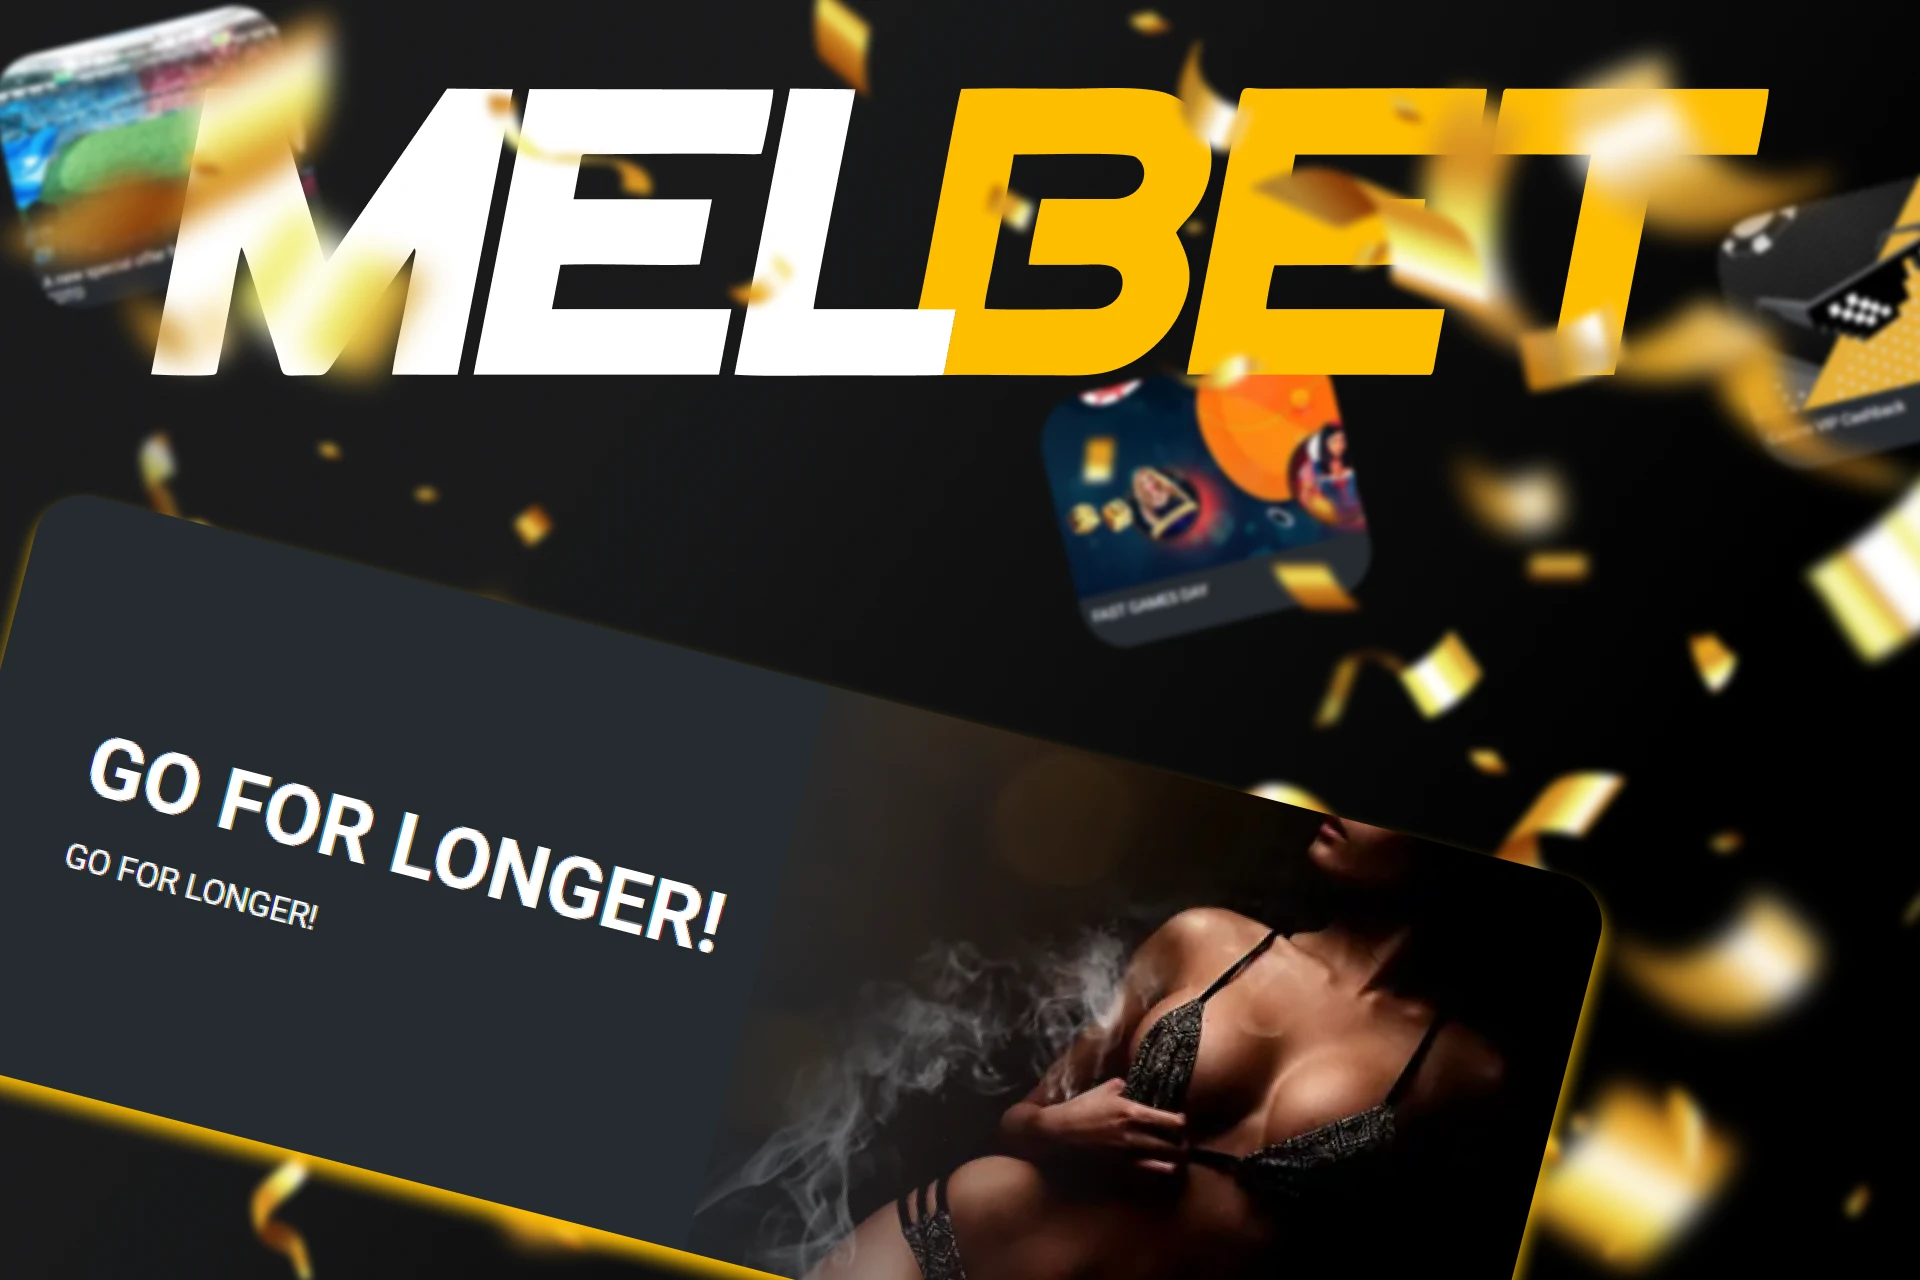 Get extra bonuses when you win on Melbet.